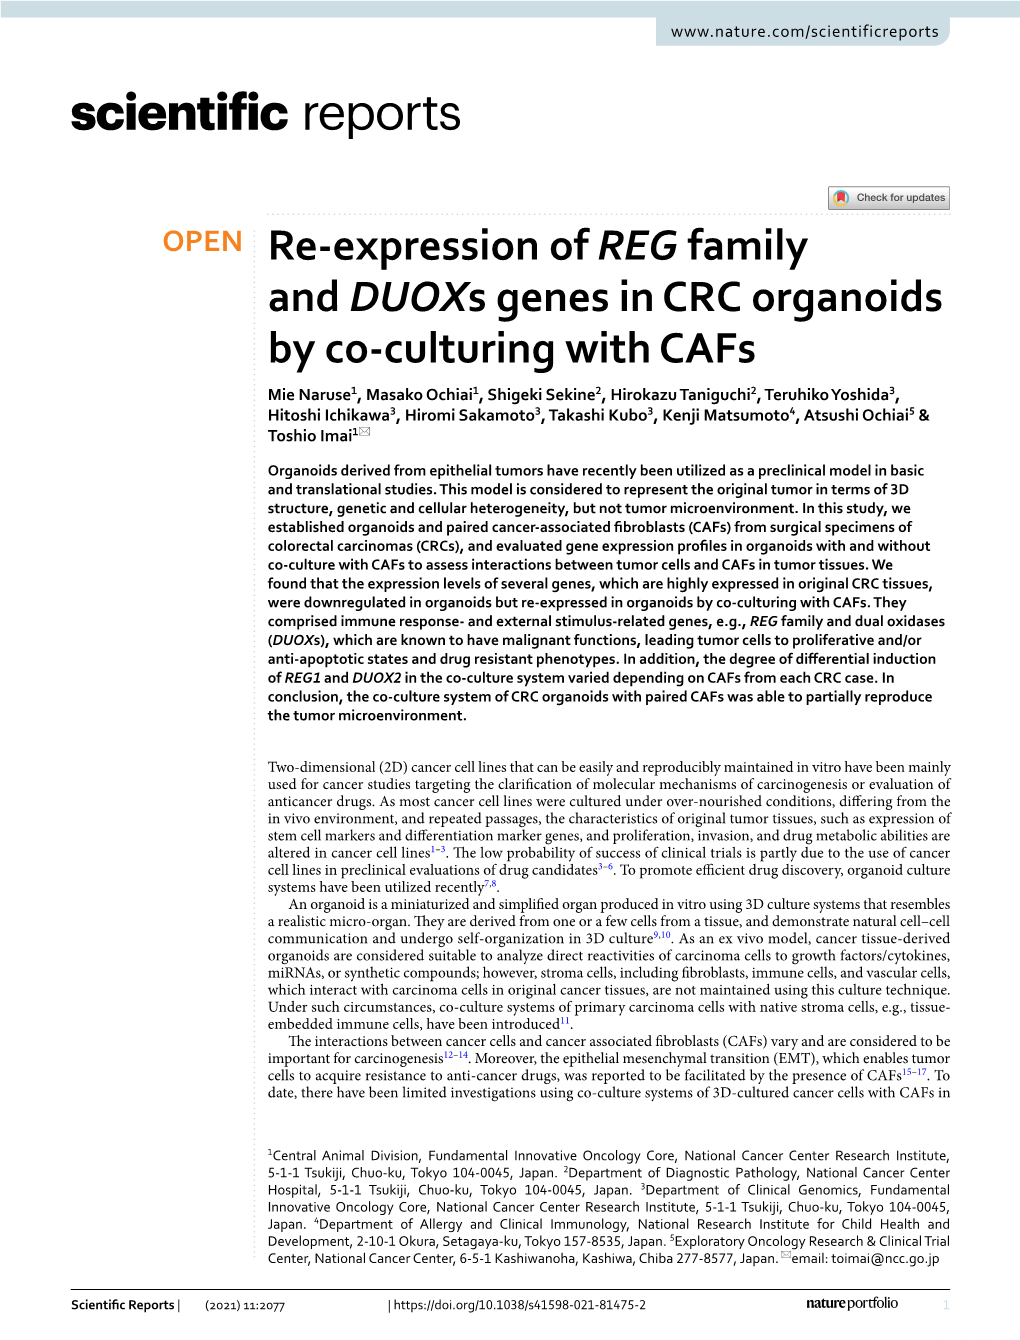 Re-Expression of REG Family and Duoxs Genes in CRC Organoids By